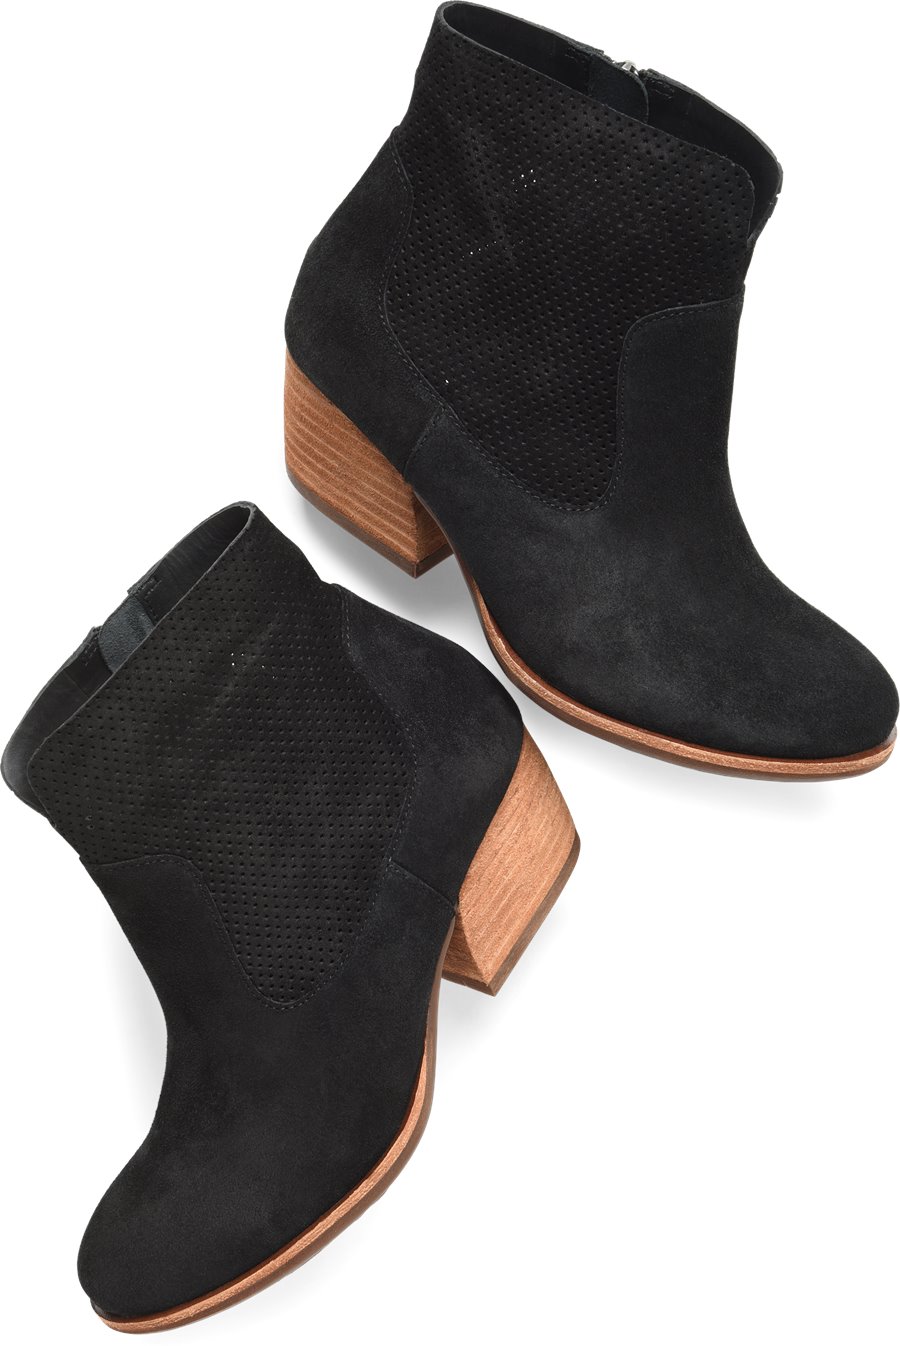 Korkease Shoes - Korkease Sherrill Women's Shoes in Black Suede color. - #korkeaseshoes #black suedeshoes